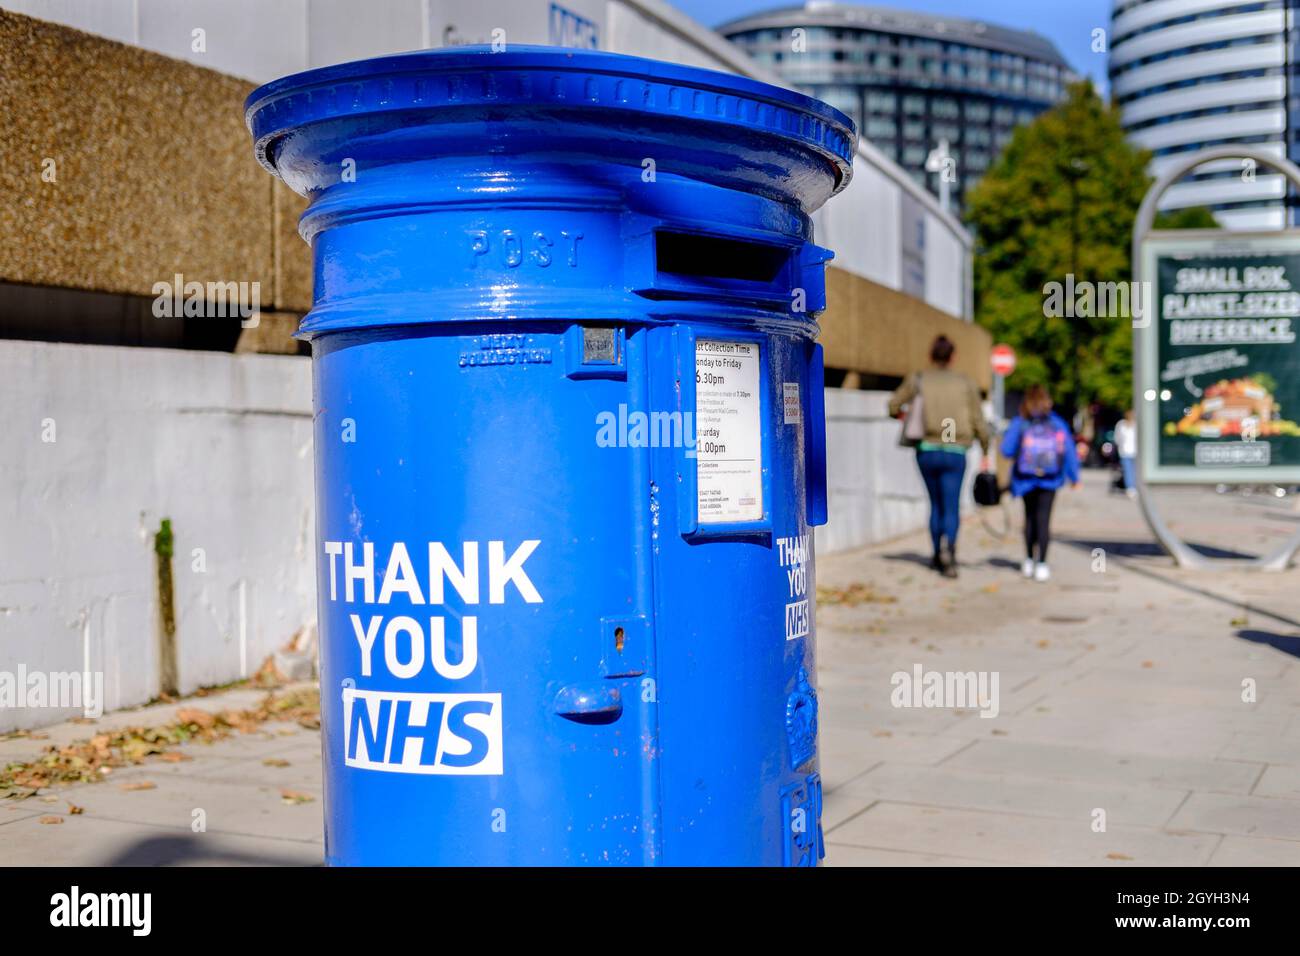 Royal Mail postbox painted NHS blue in recognition of the dedication of staff during the coronavirus pandemic, outside St Thomas' Hospital London. Stock Photo